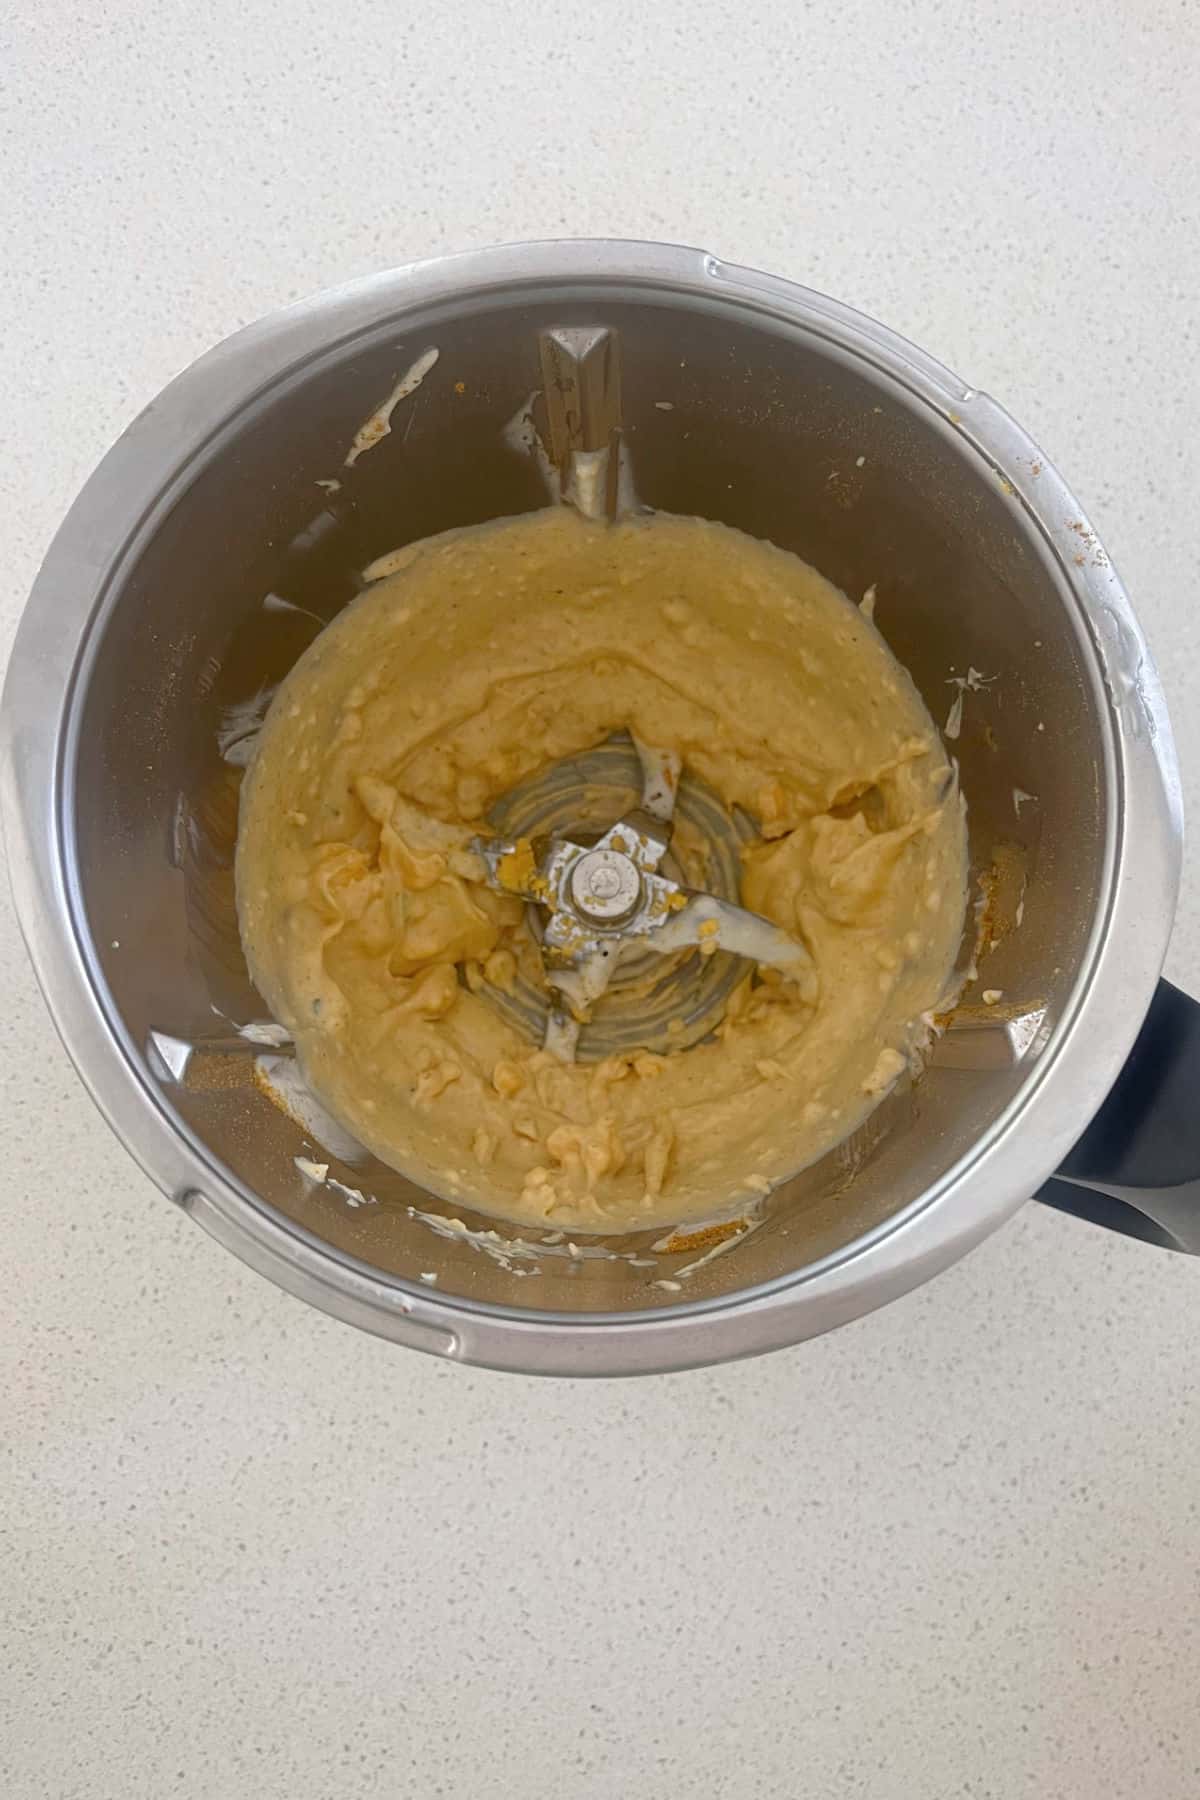 Combined Curried Eggs ingredients in a Thermomix bowl.